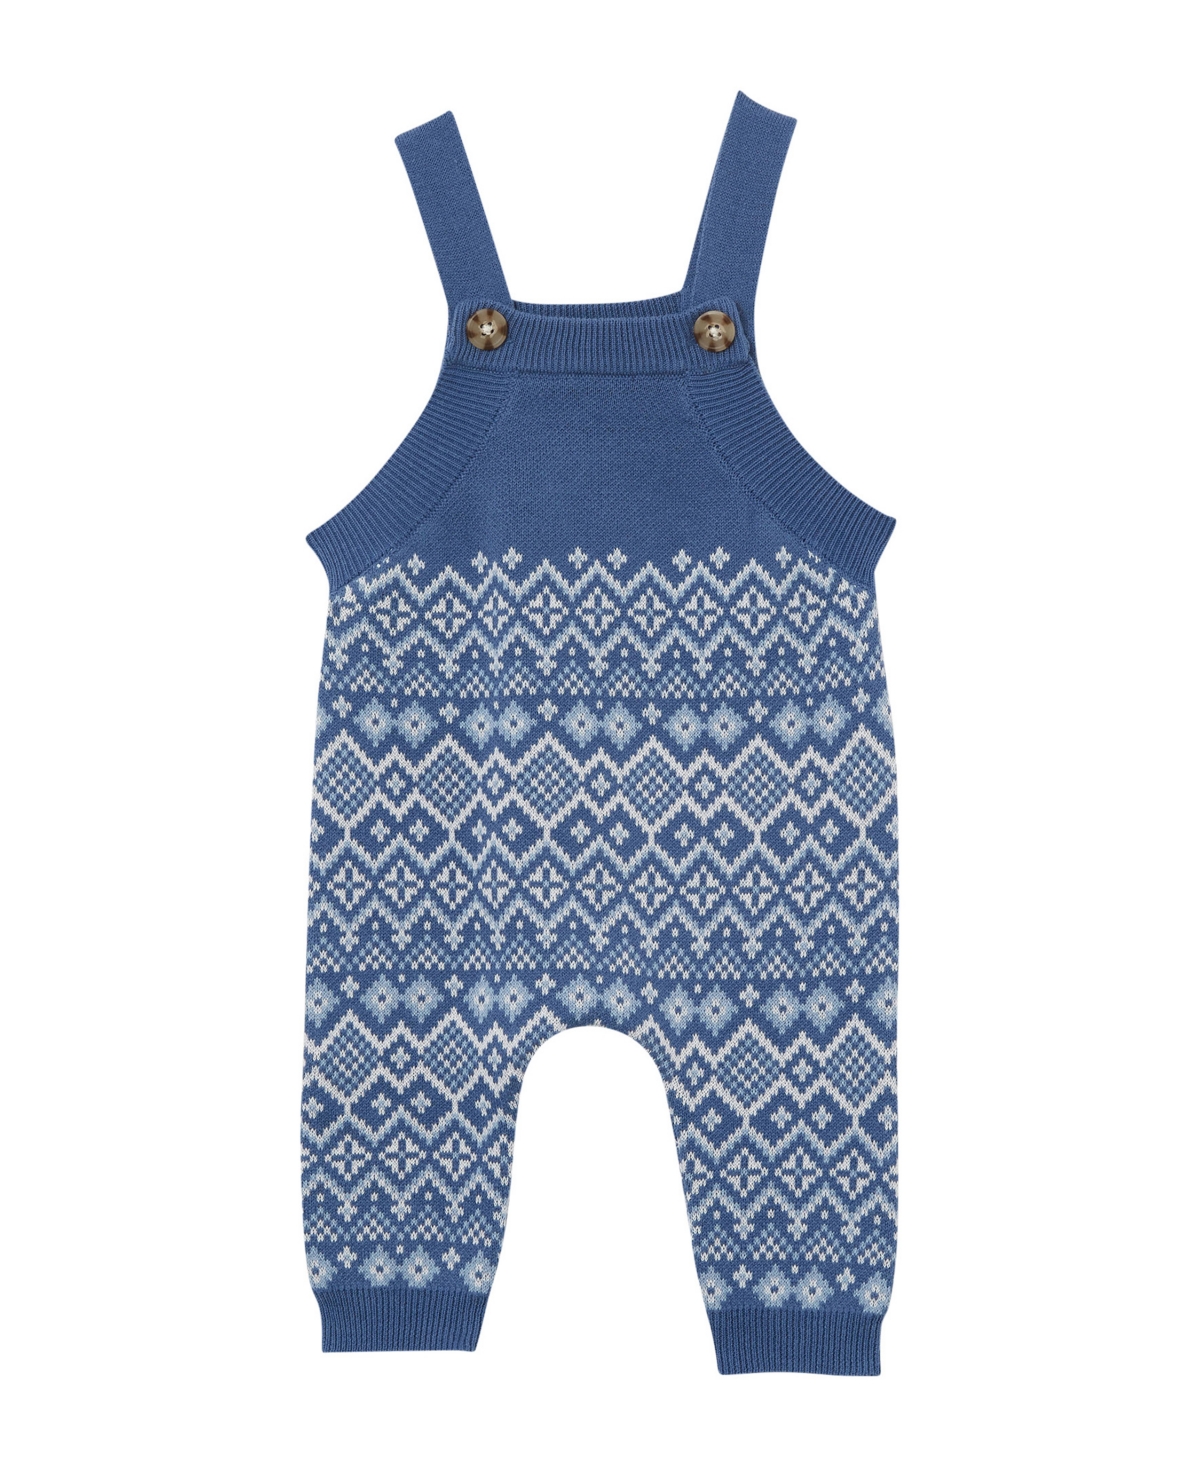 Cotton On Baby Boys And Baby Girls Cleo Jacquard Knit Sleeveless Dungaree Overalls In Petty Blue